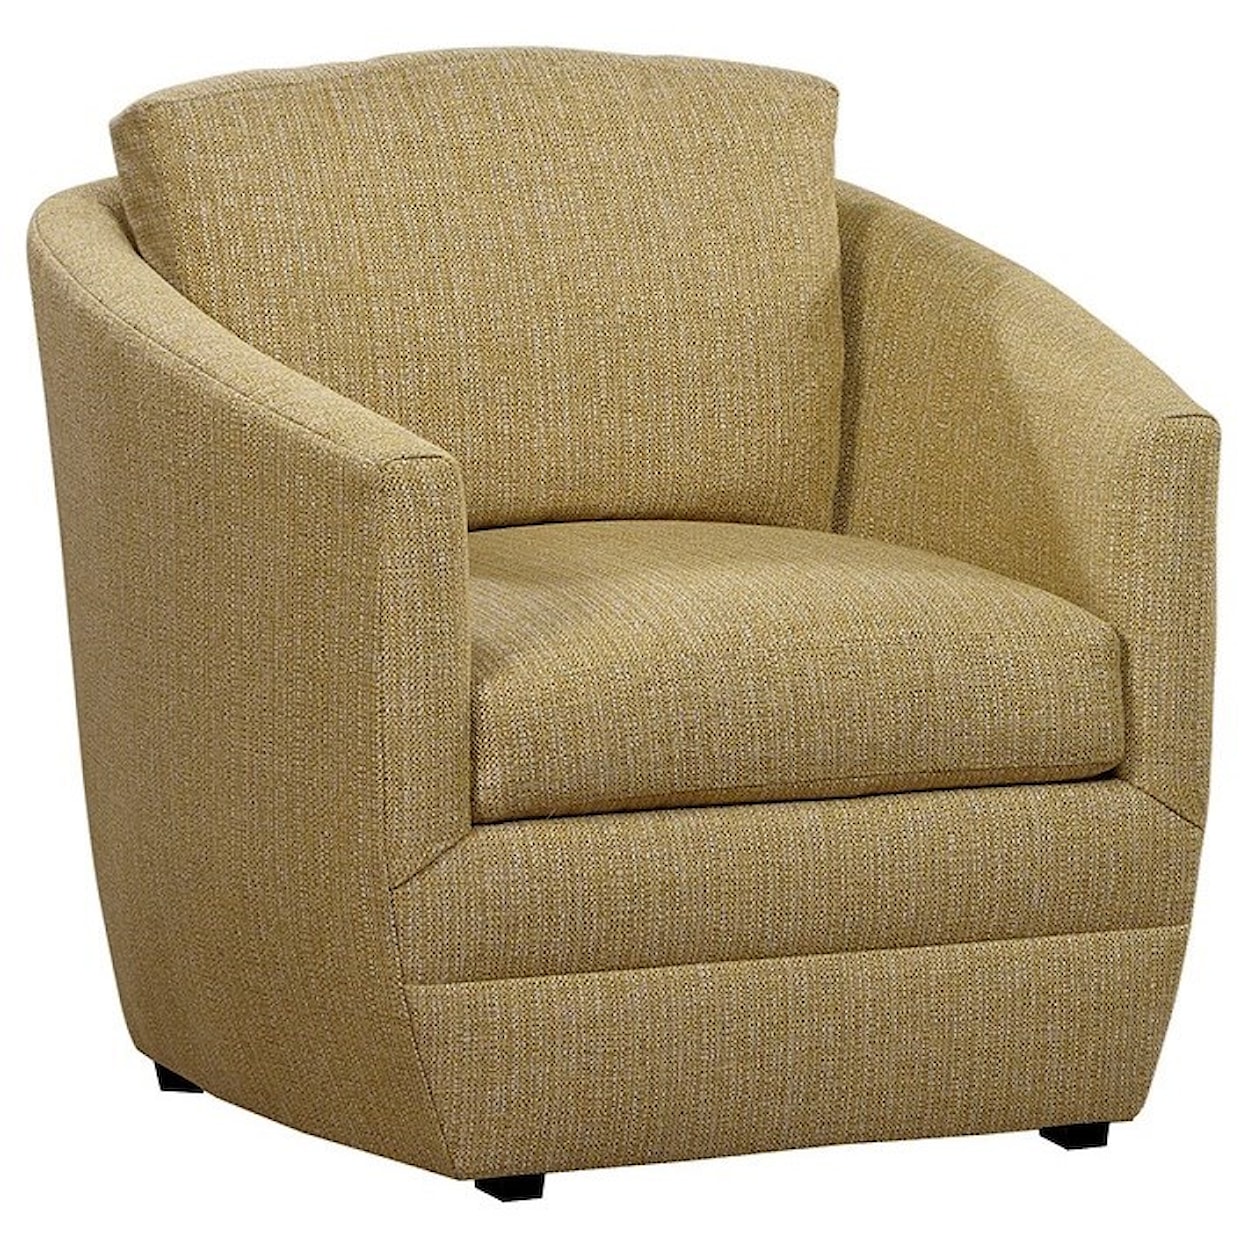 Huntington House Chairs Upholstered Accent Barrel Chair